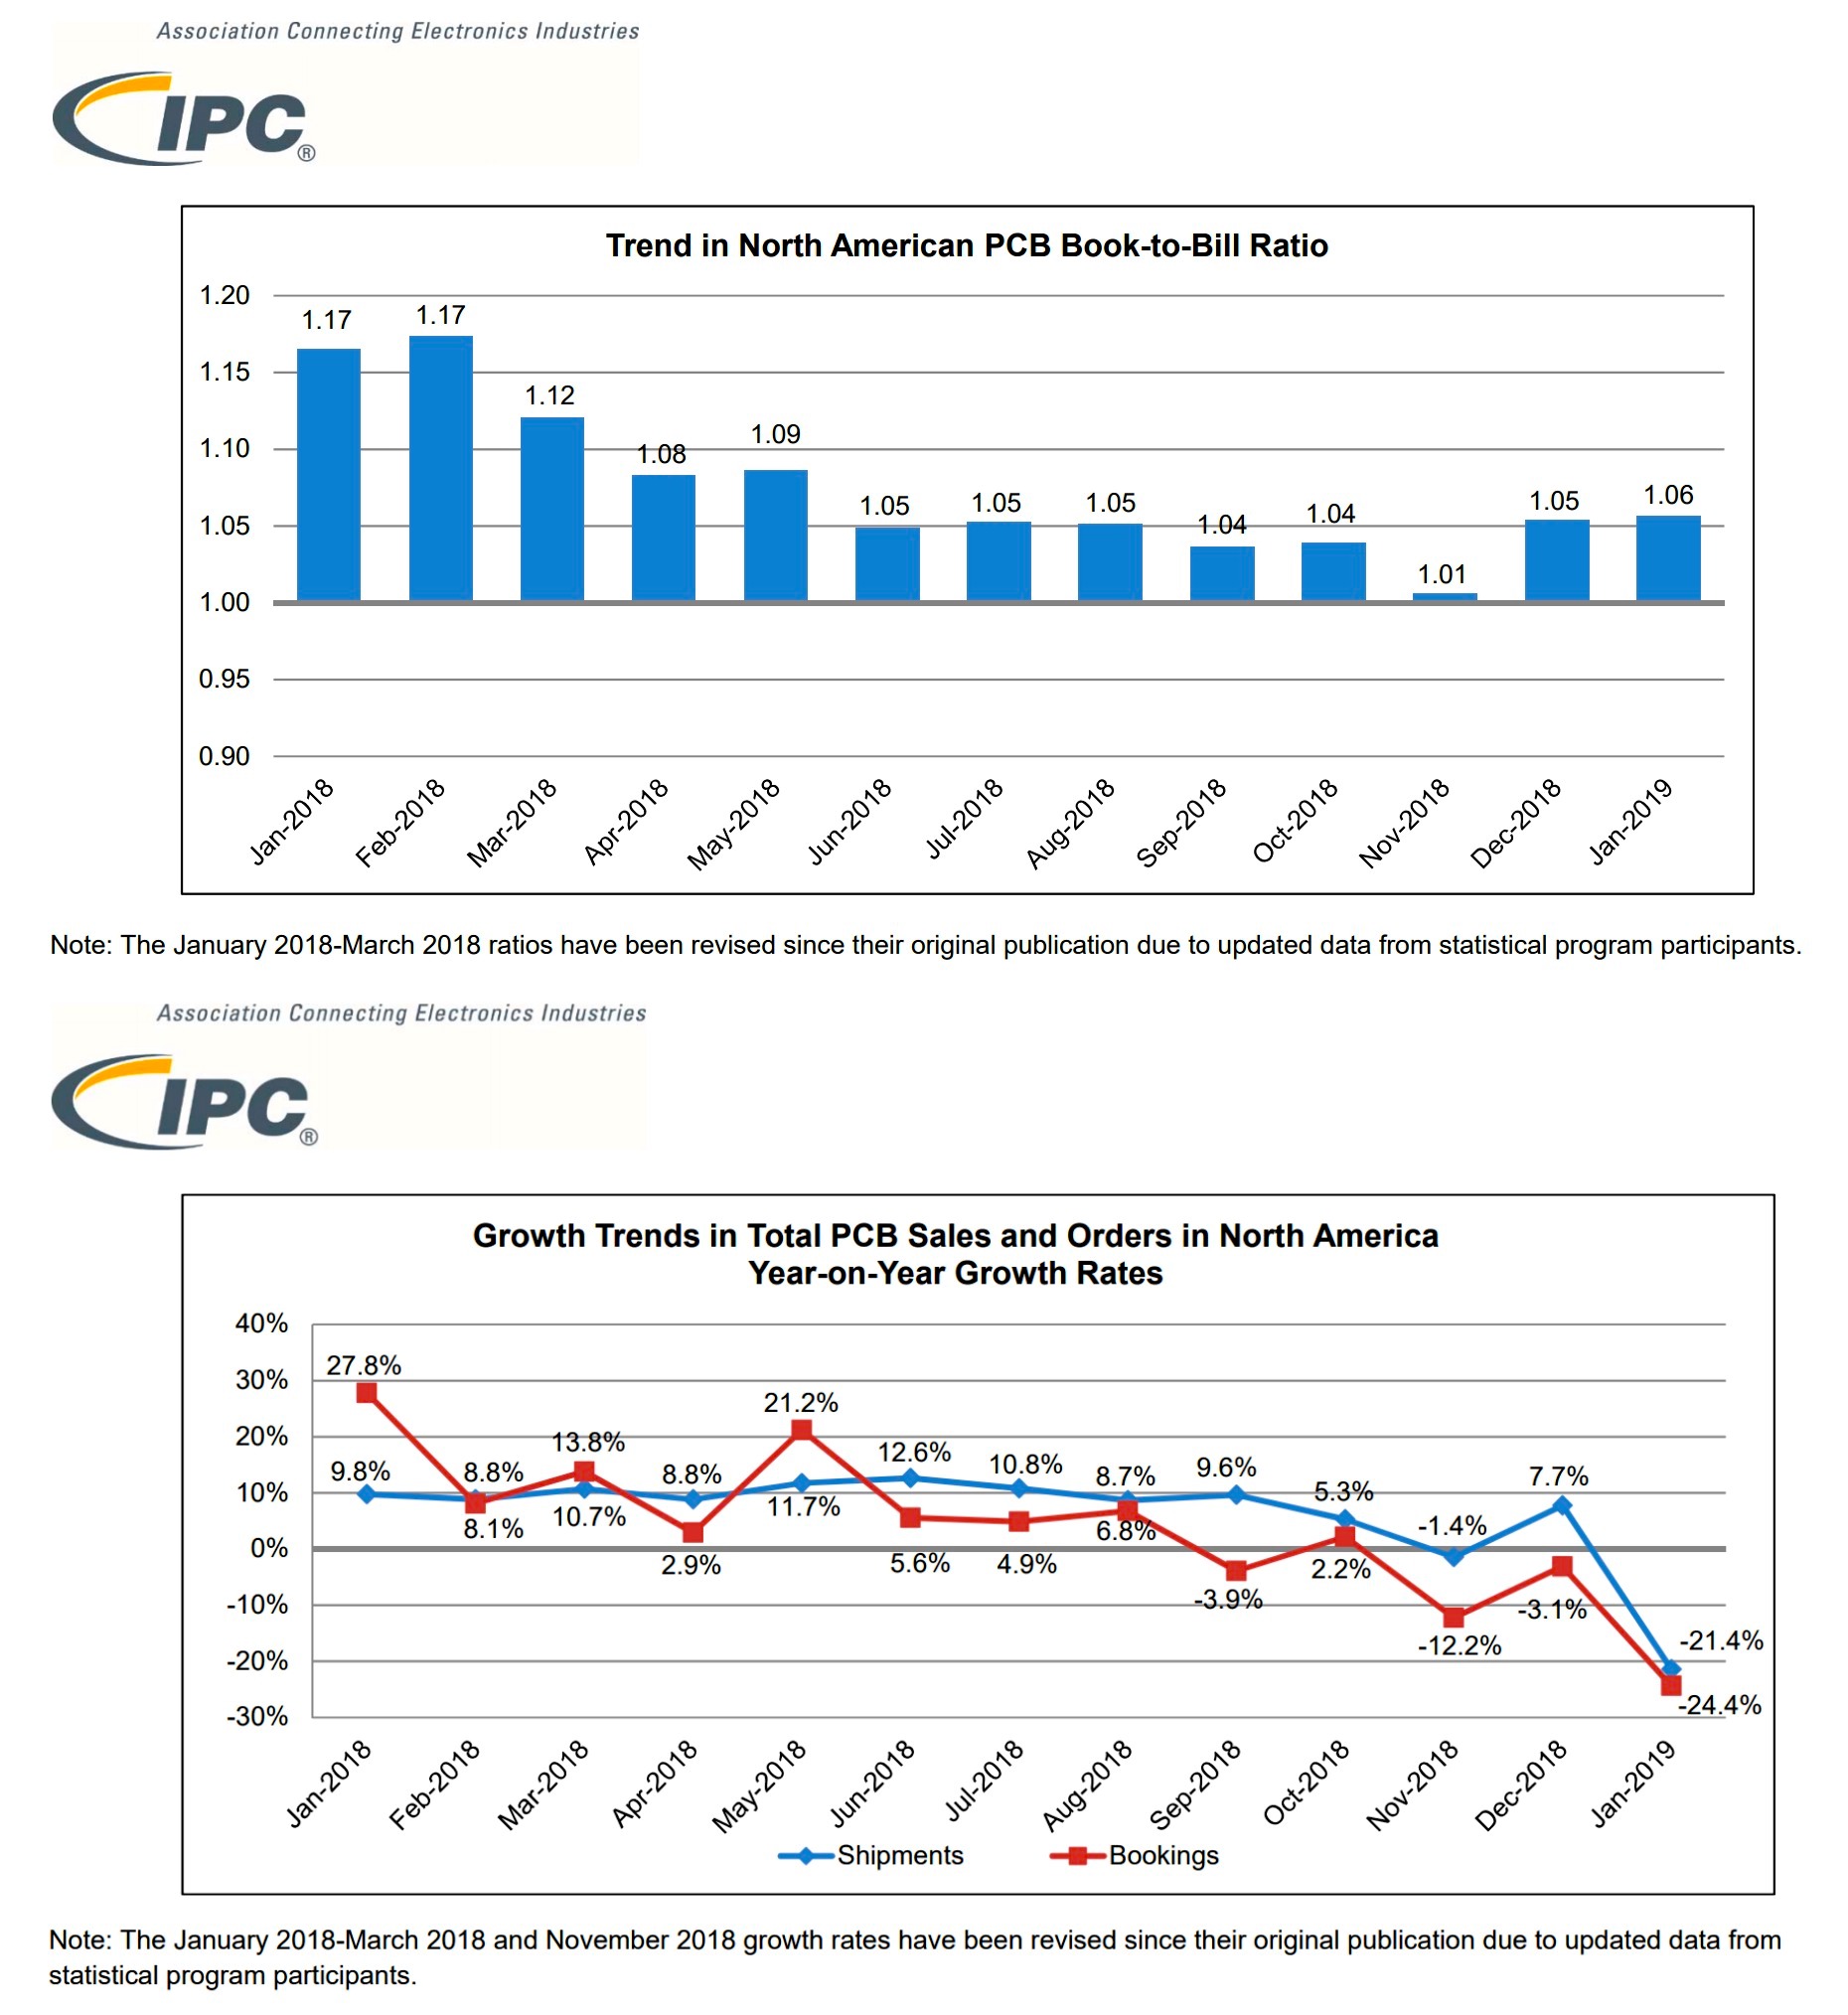 March 2019 Connector Industry News: January 2019 findings from IPC's North American PCB Statistical Program